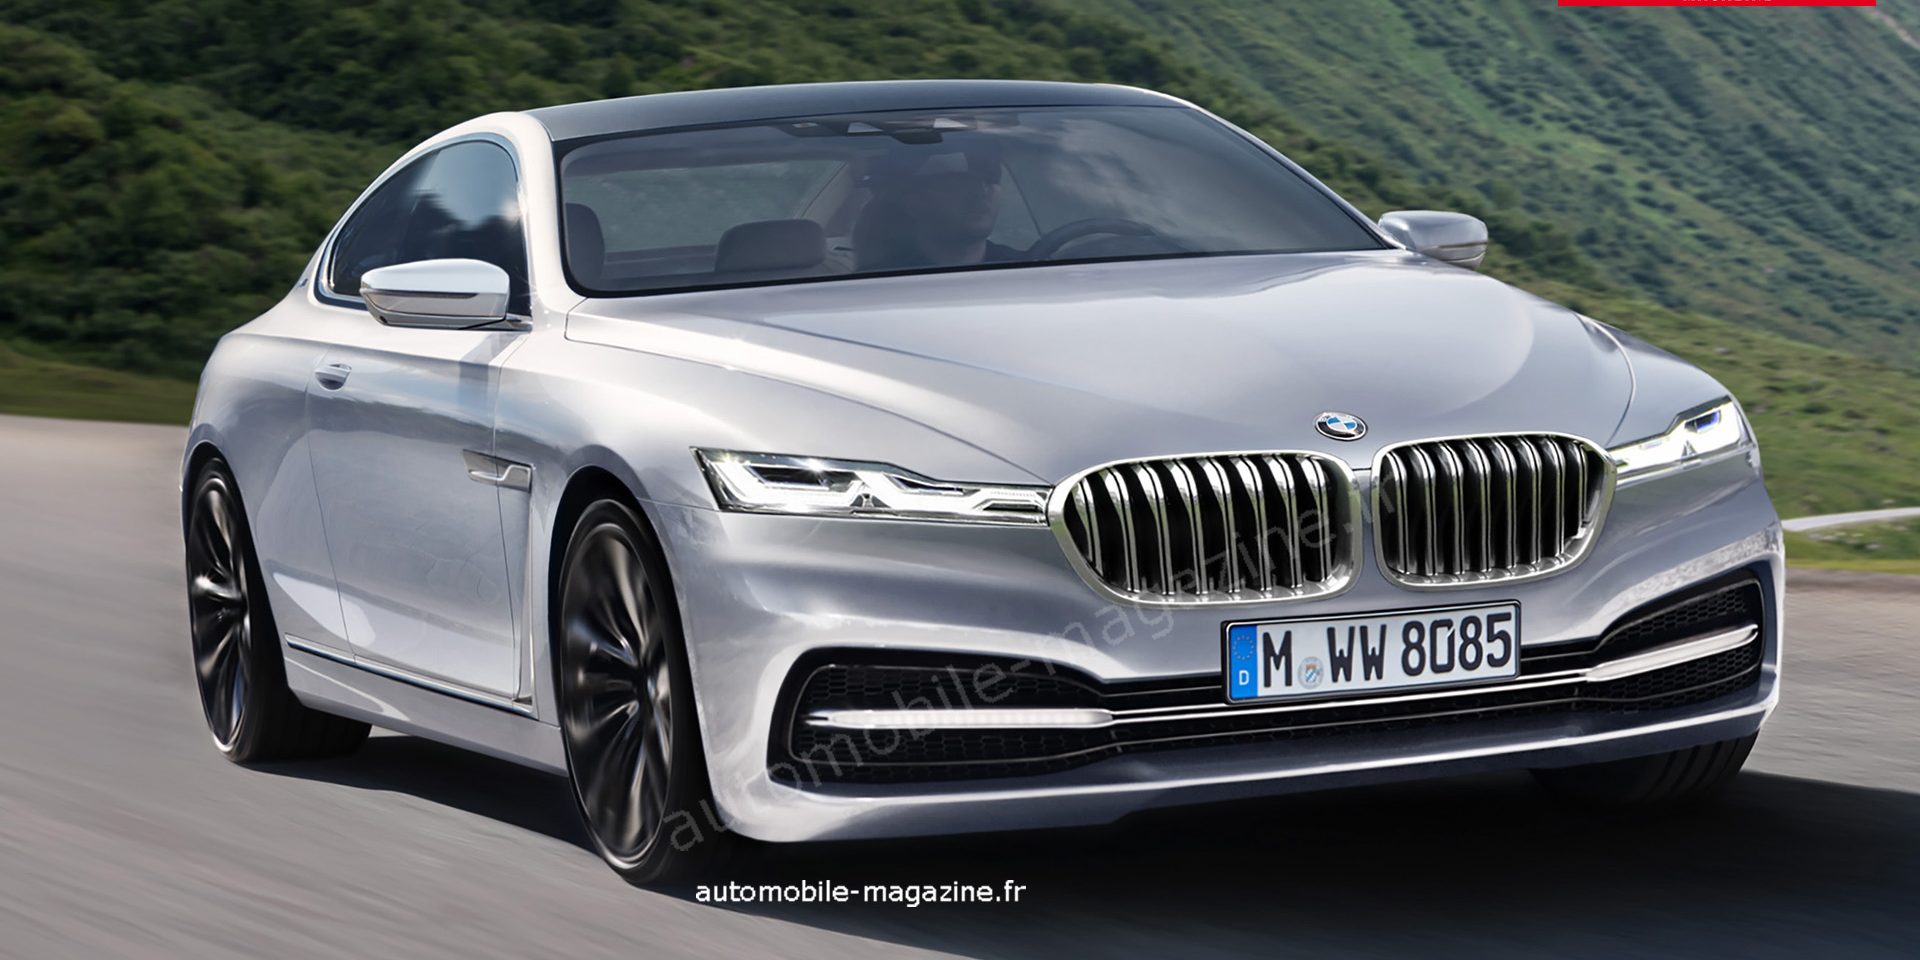 BMW 8-Series Launched in New Renderings